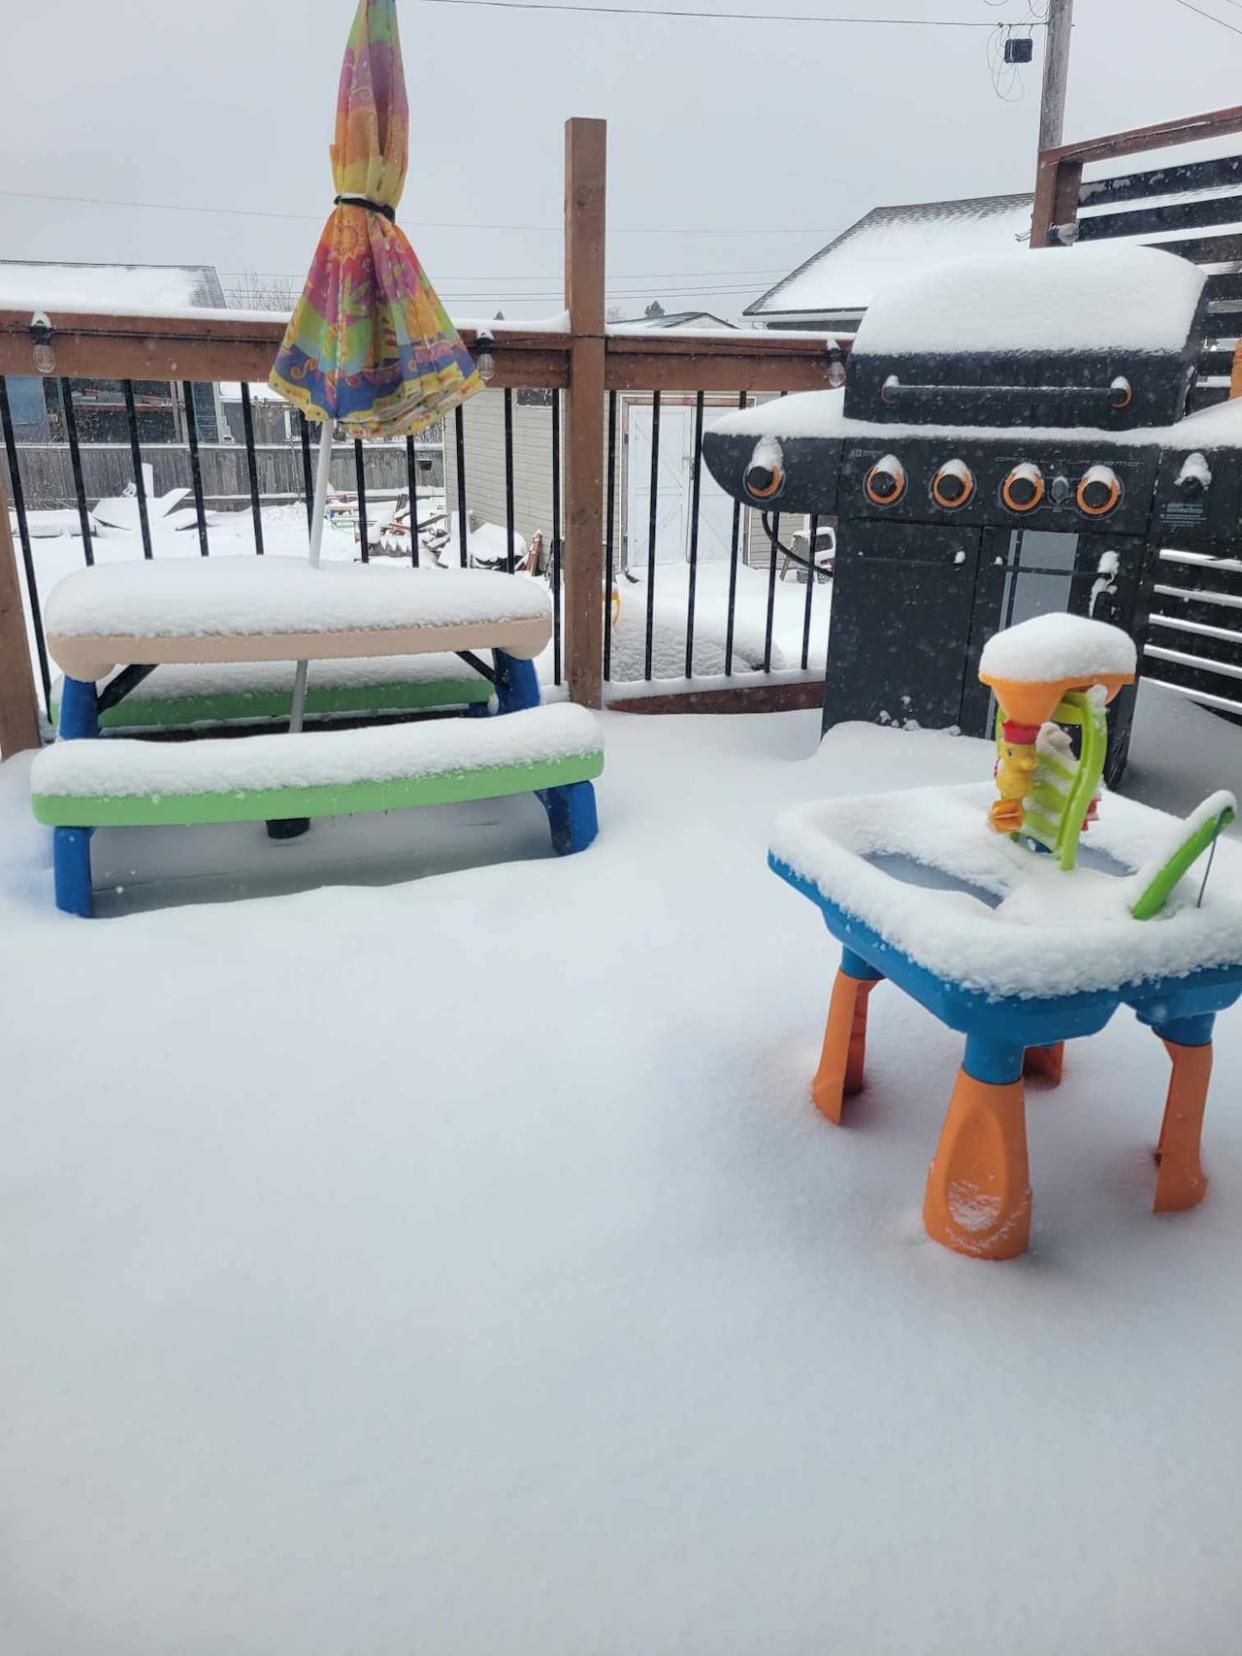 People in Labrador City and Wabush woke up Thursday to more snow than they likely would want for late May. (Submitted by Danielle Ballard  - image credit)